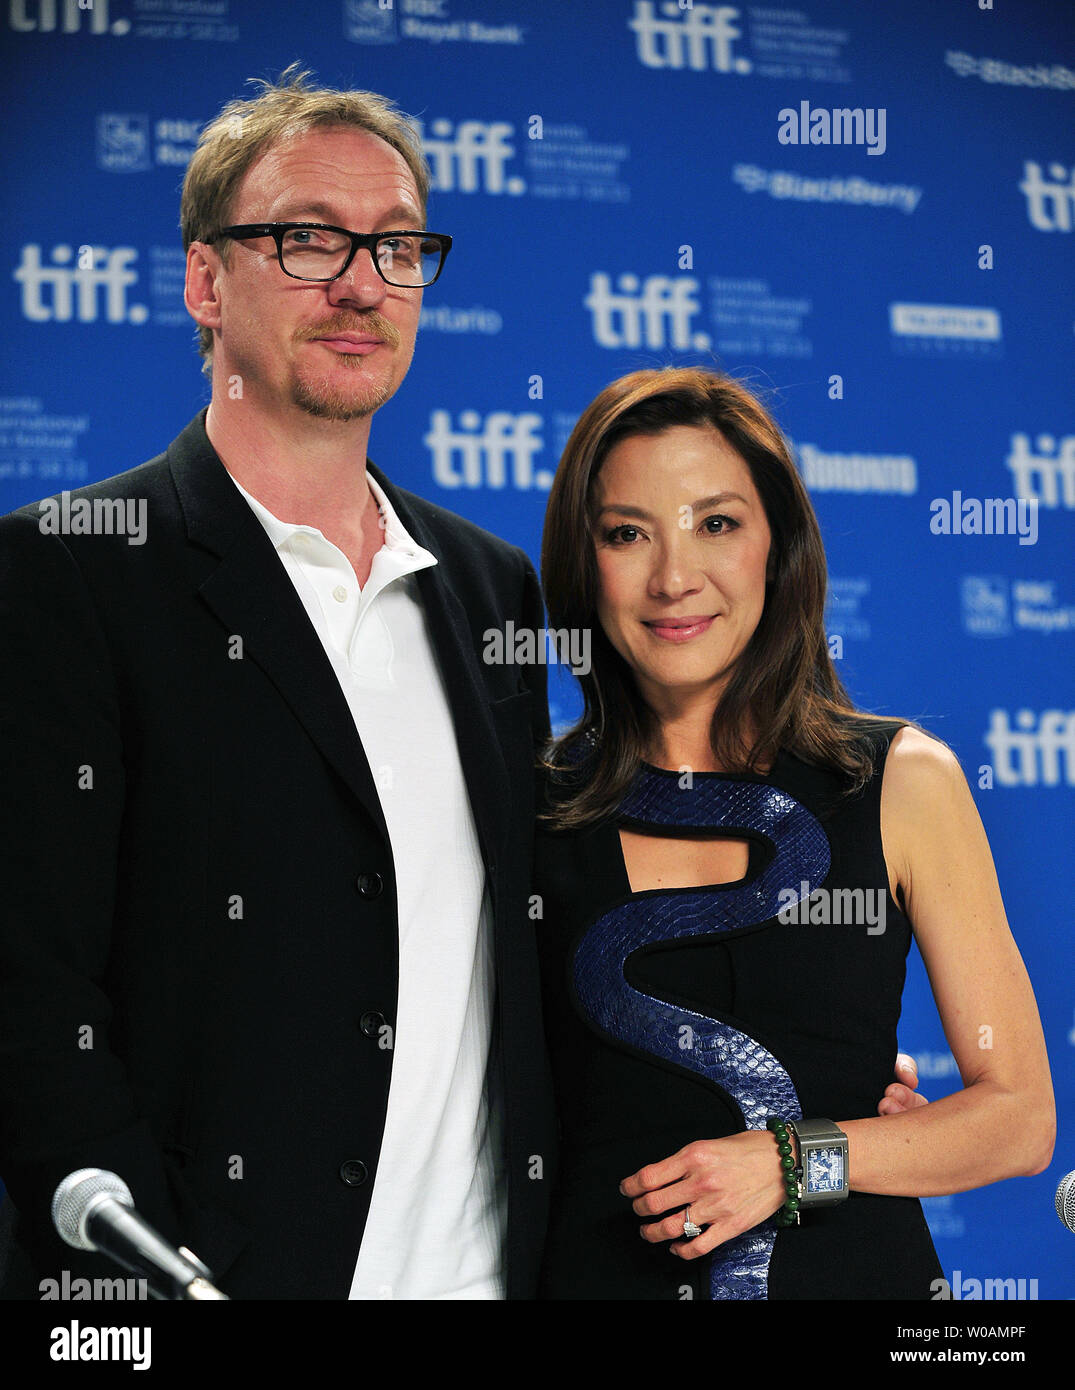 Actors Michelle Yeoh (R) and David Thewlis attend a press conference for 'The Lady' at the TIFF Bell Lightbox during the Toronto International Film Festival in Toronto, Canada on September 12, 2011.  UPI/Christine Chew Stock Photo